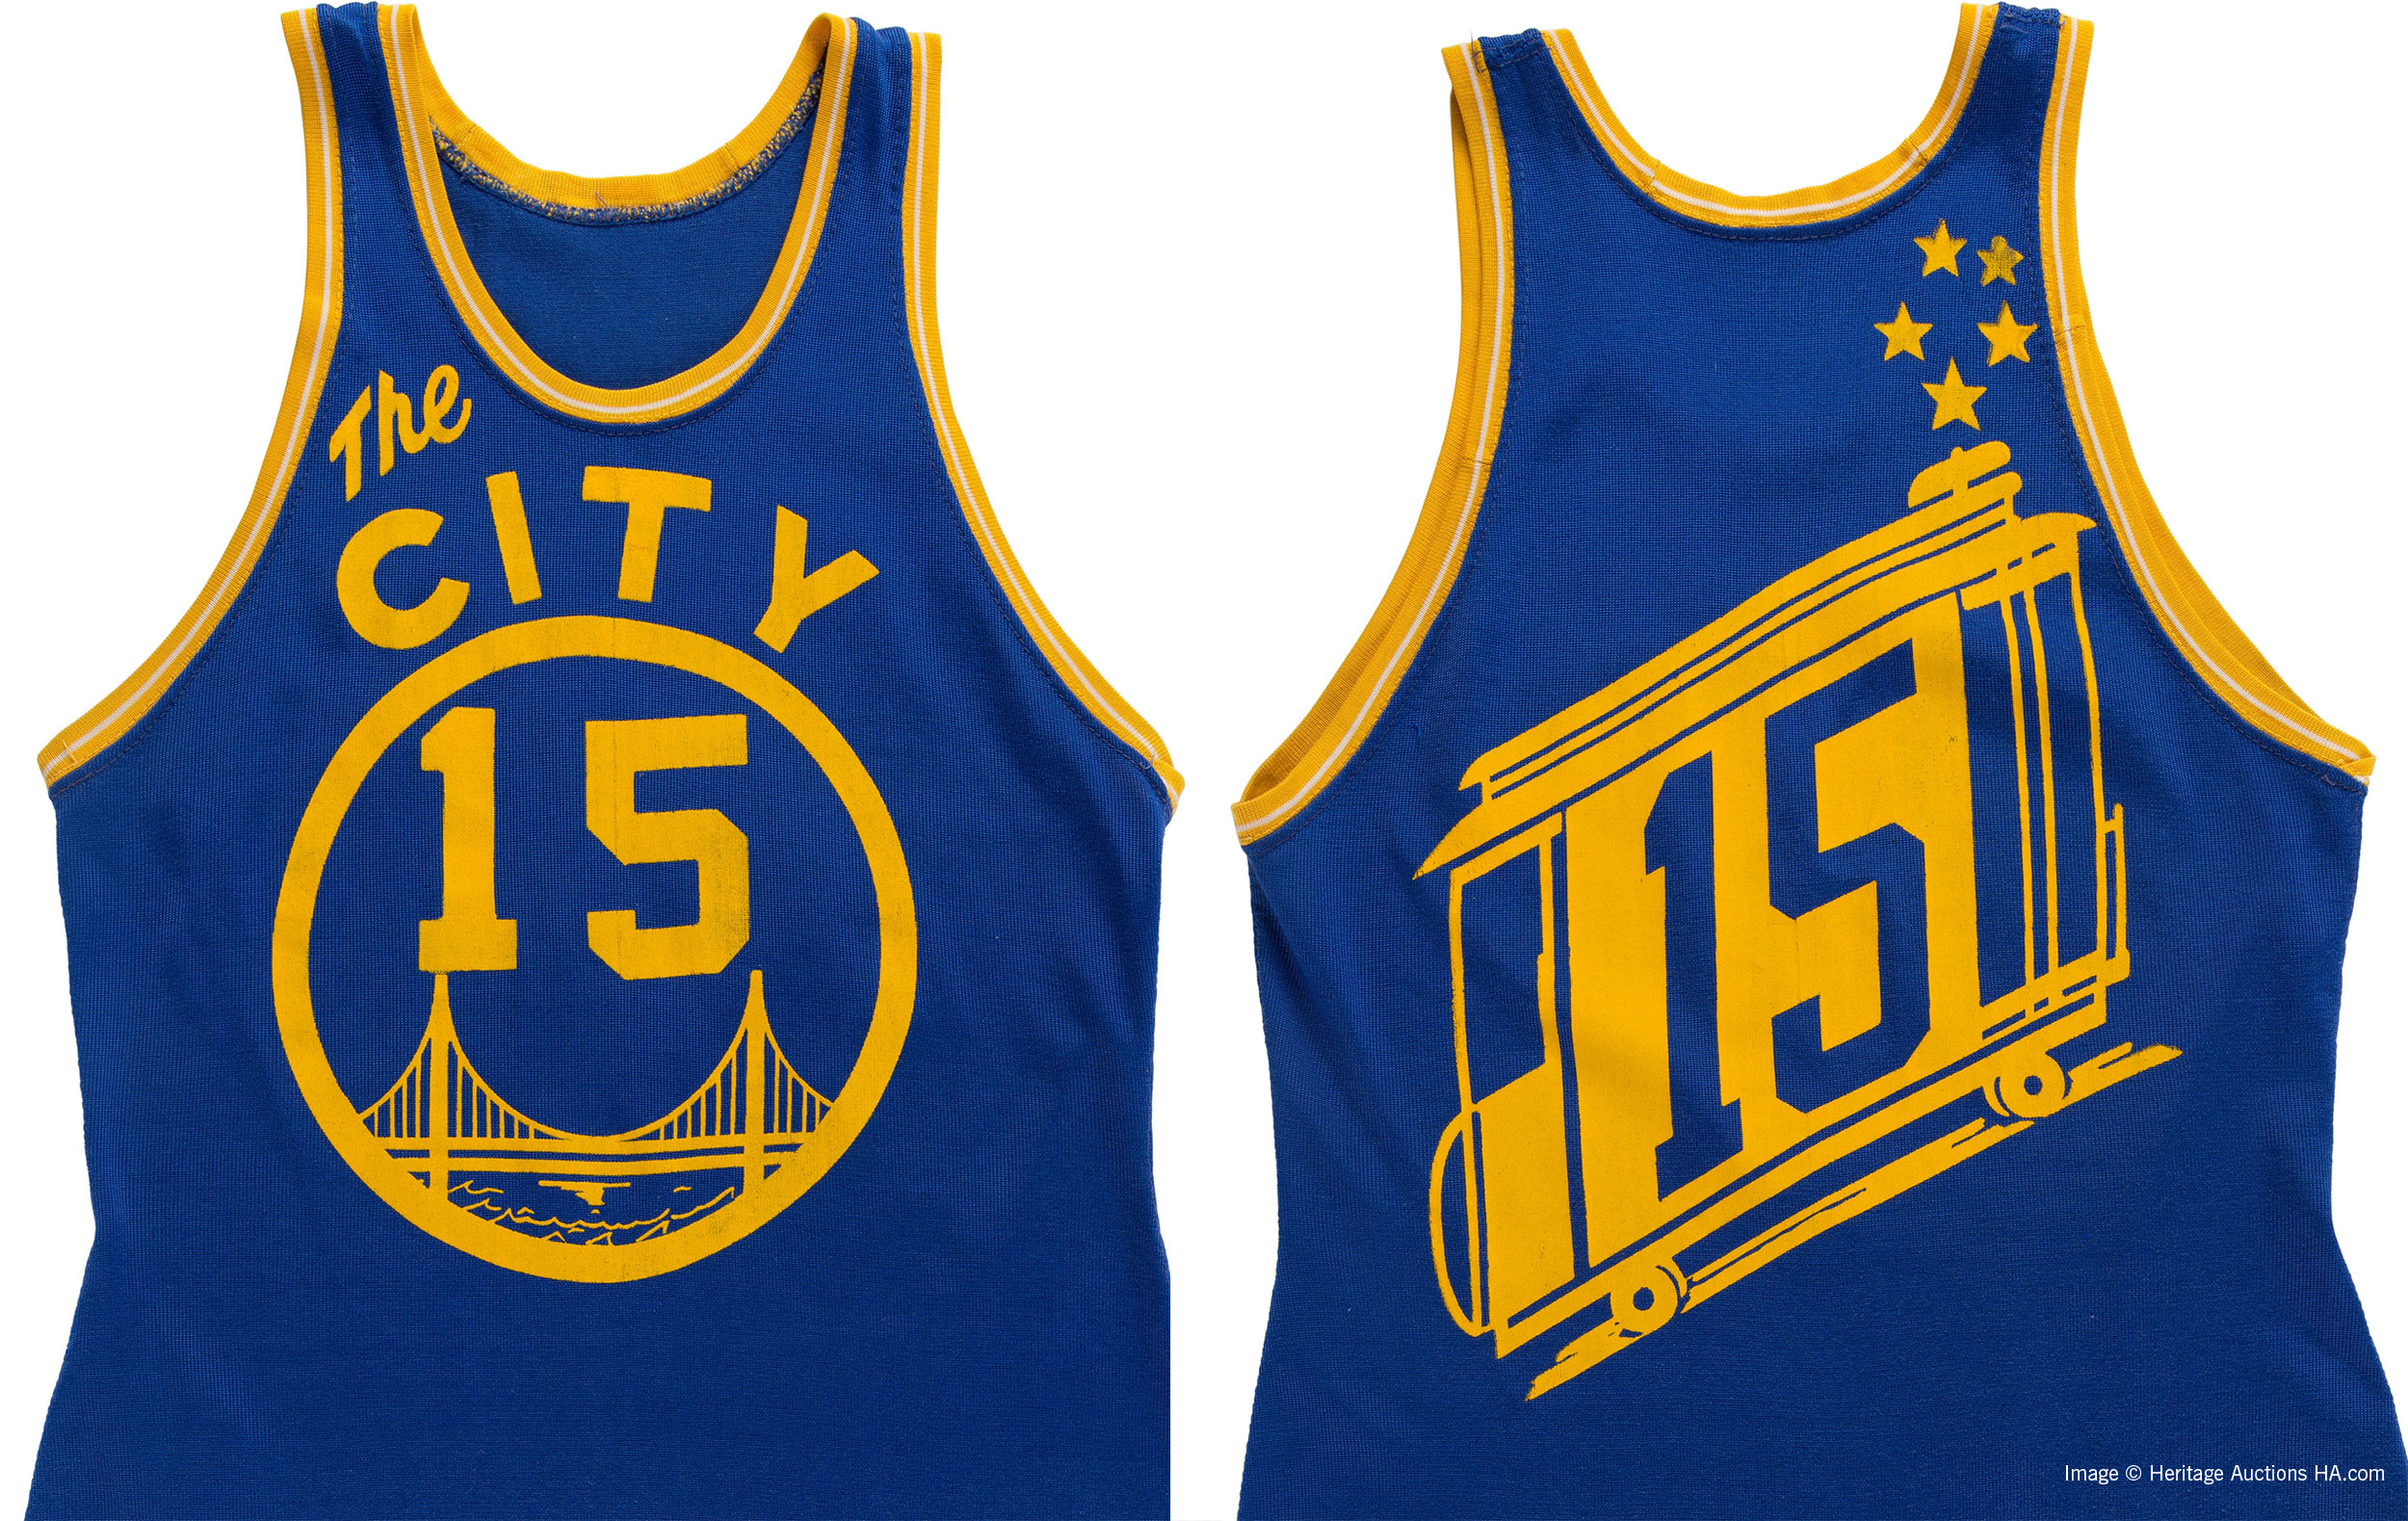 The Warriors, Their Classic “City 